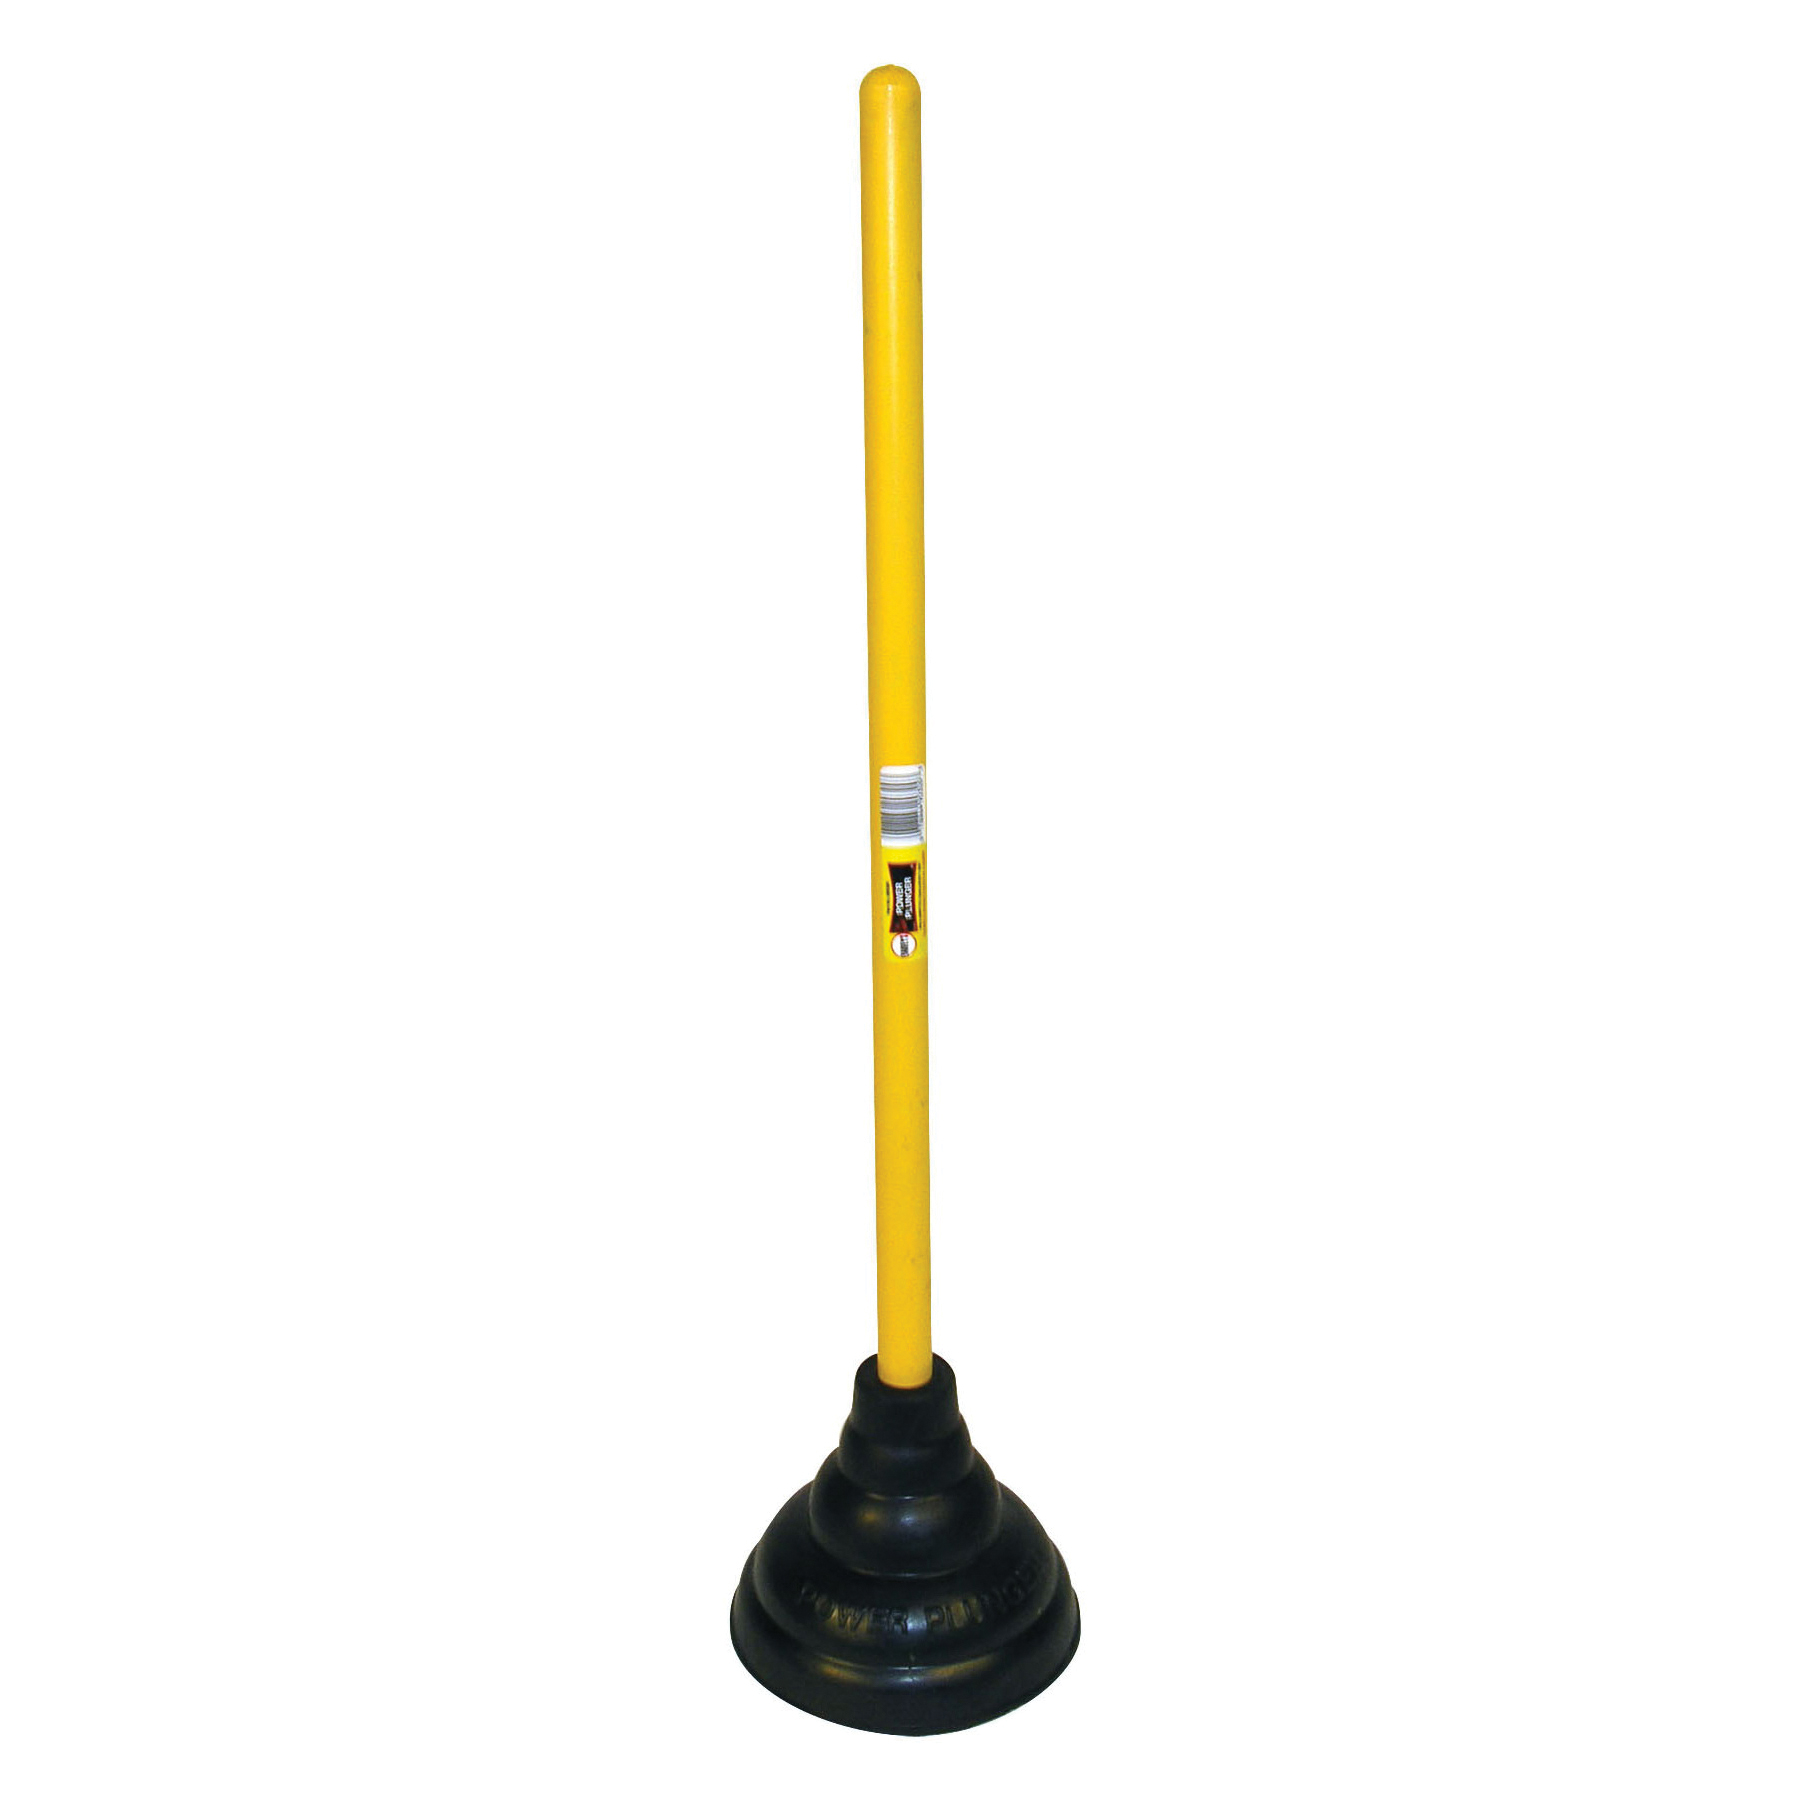 Harvey® 090300 Power Plunger With Yellow Handle, Black